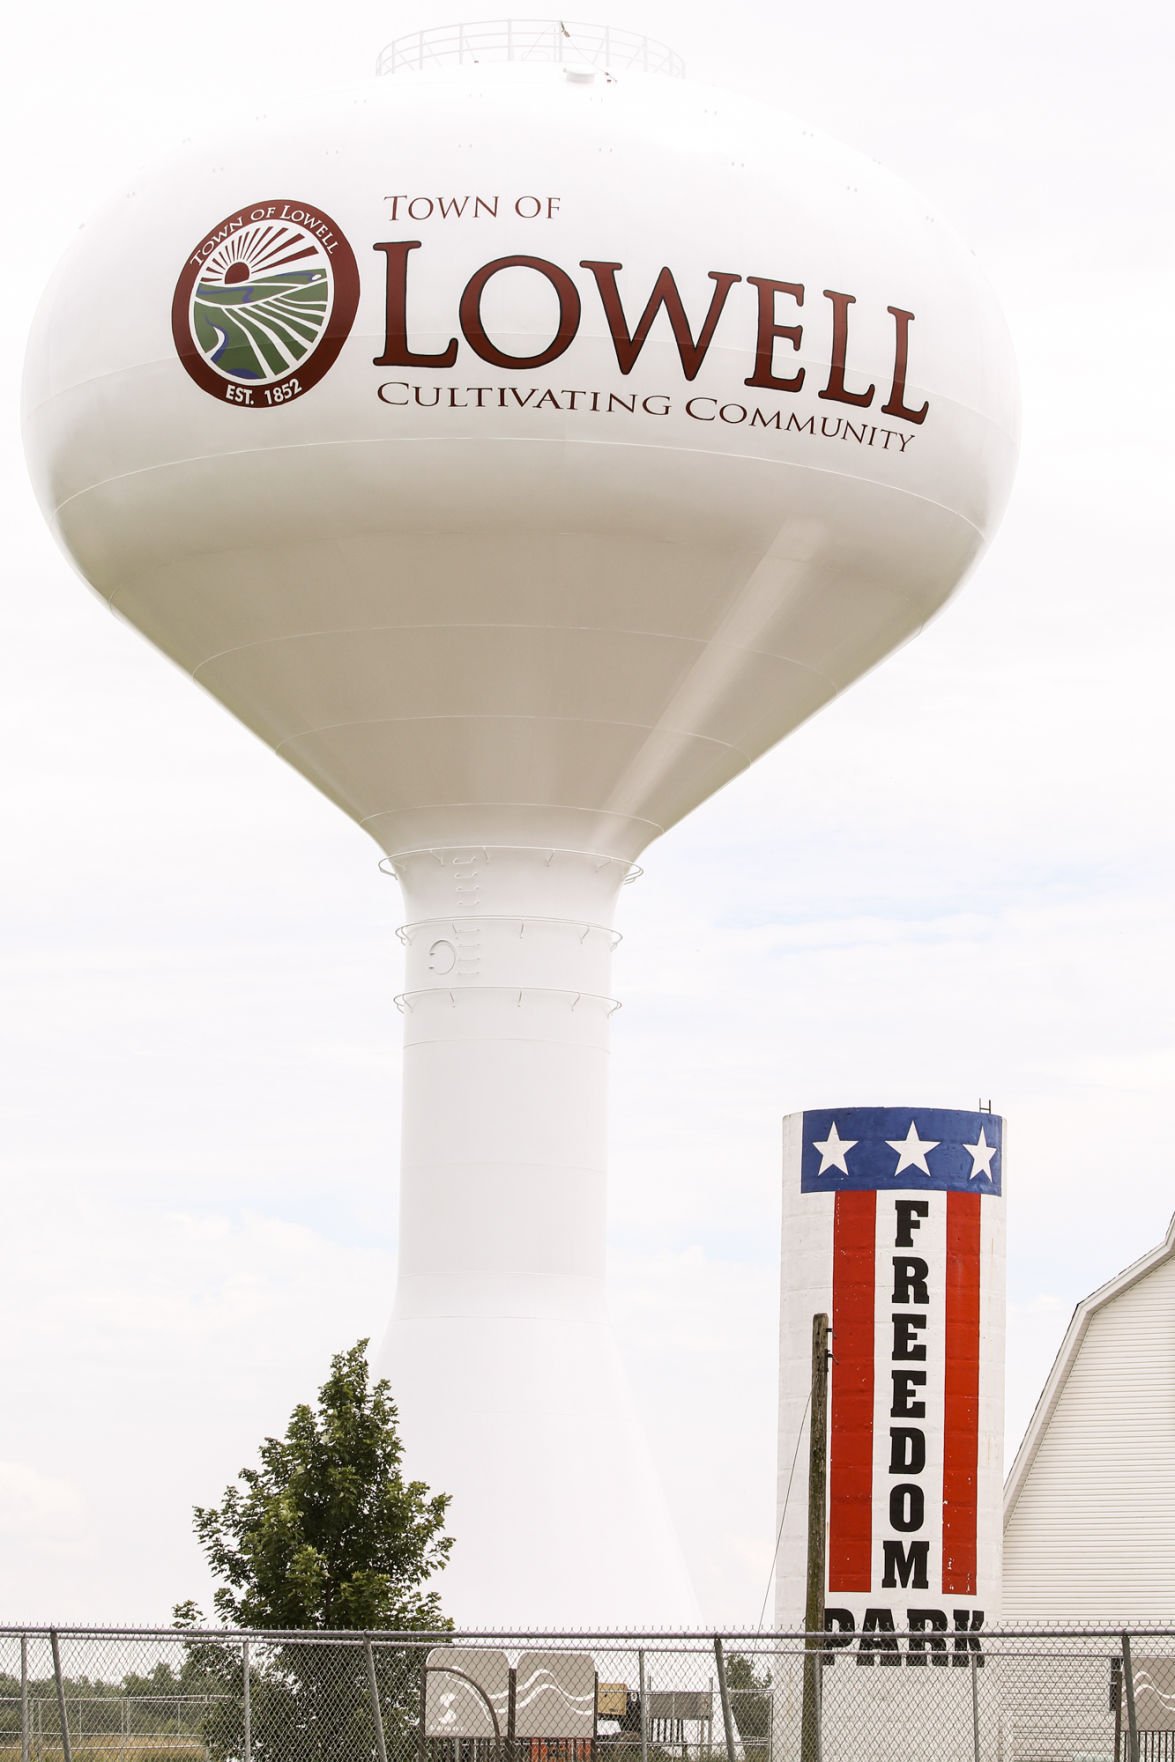 Read more about the article Water Quality Report For Lowell Indiana 2018